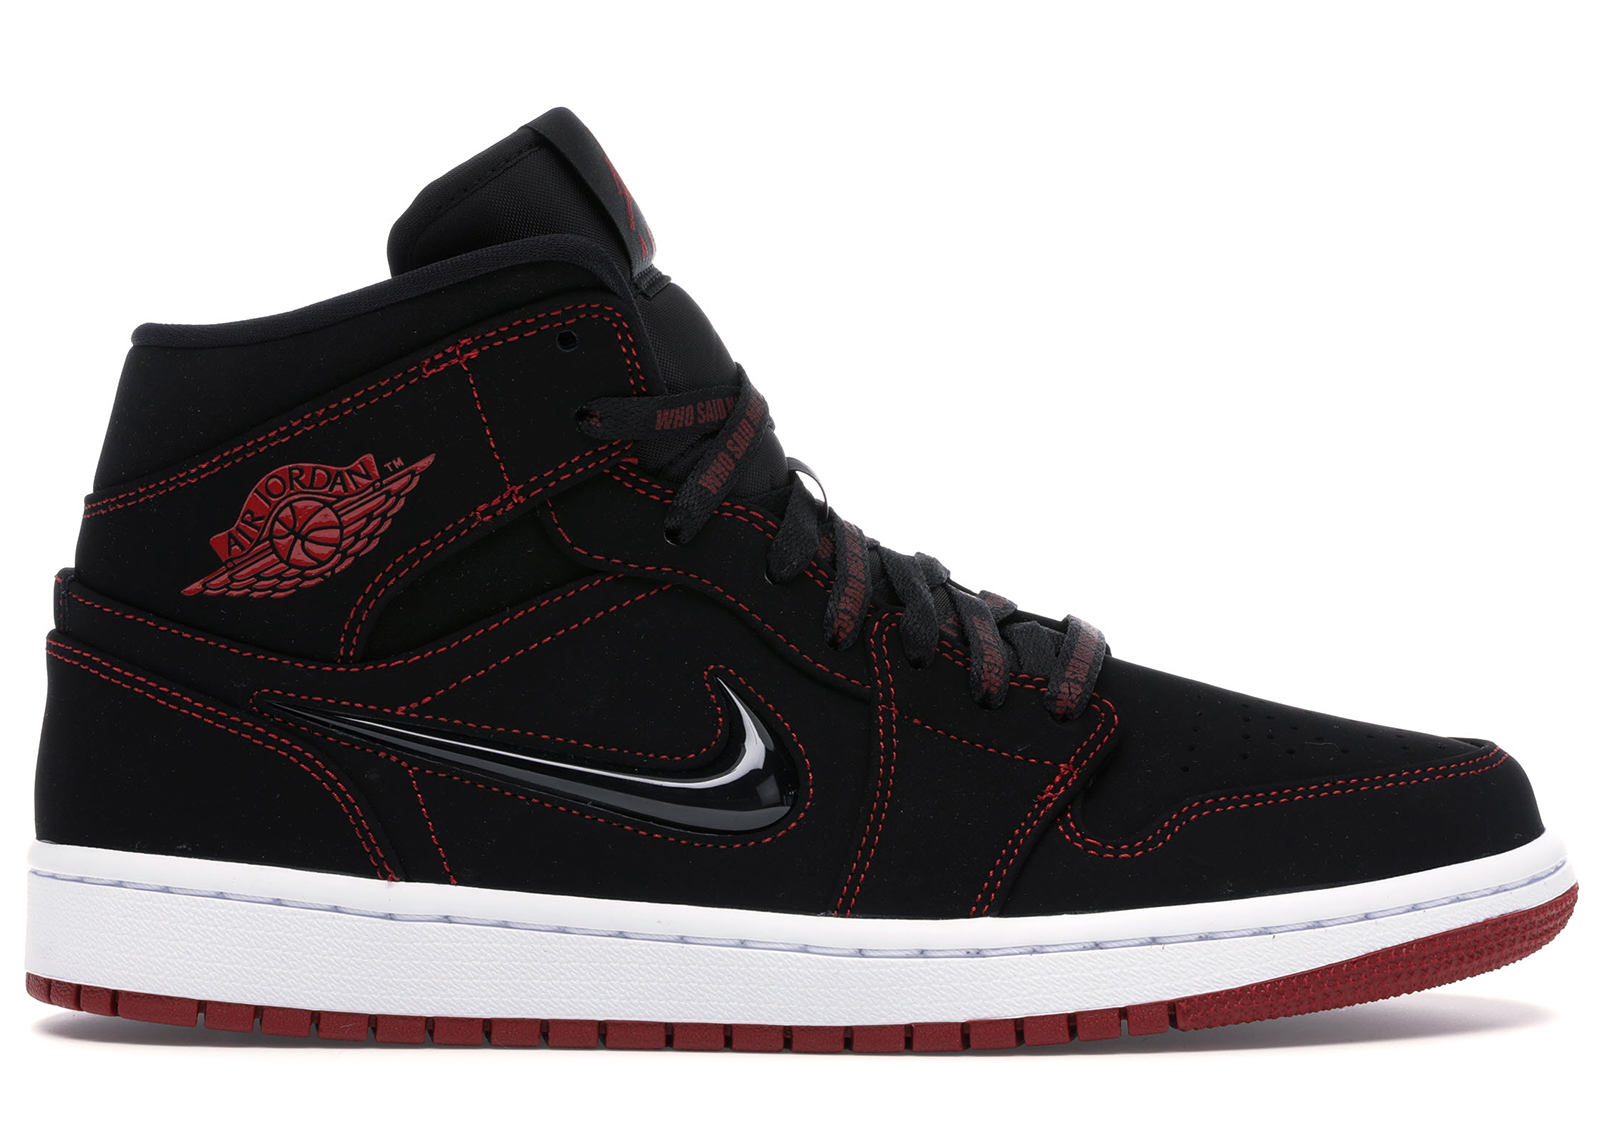 Jordan 1 Mid Fearless Come Fly With Me